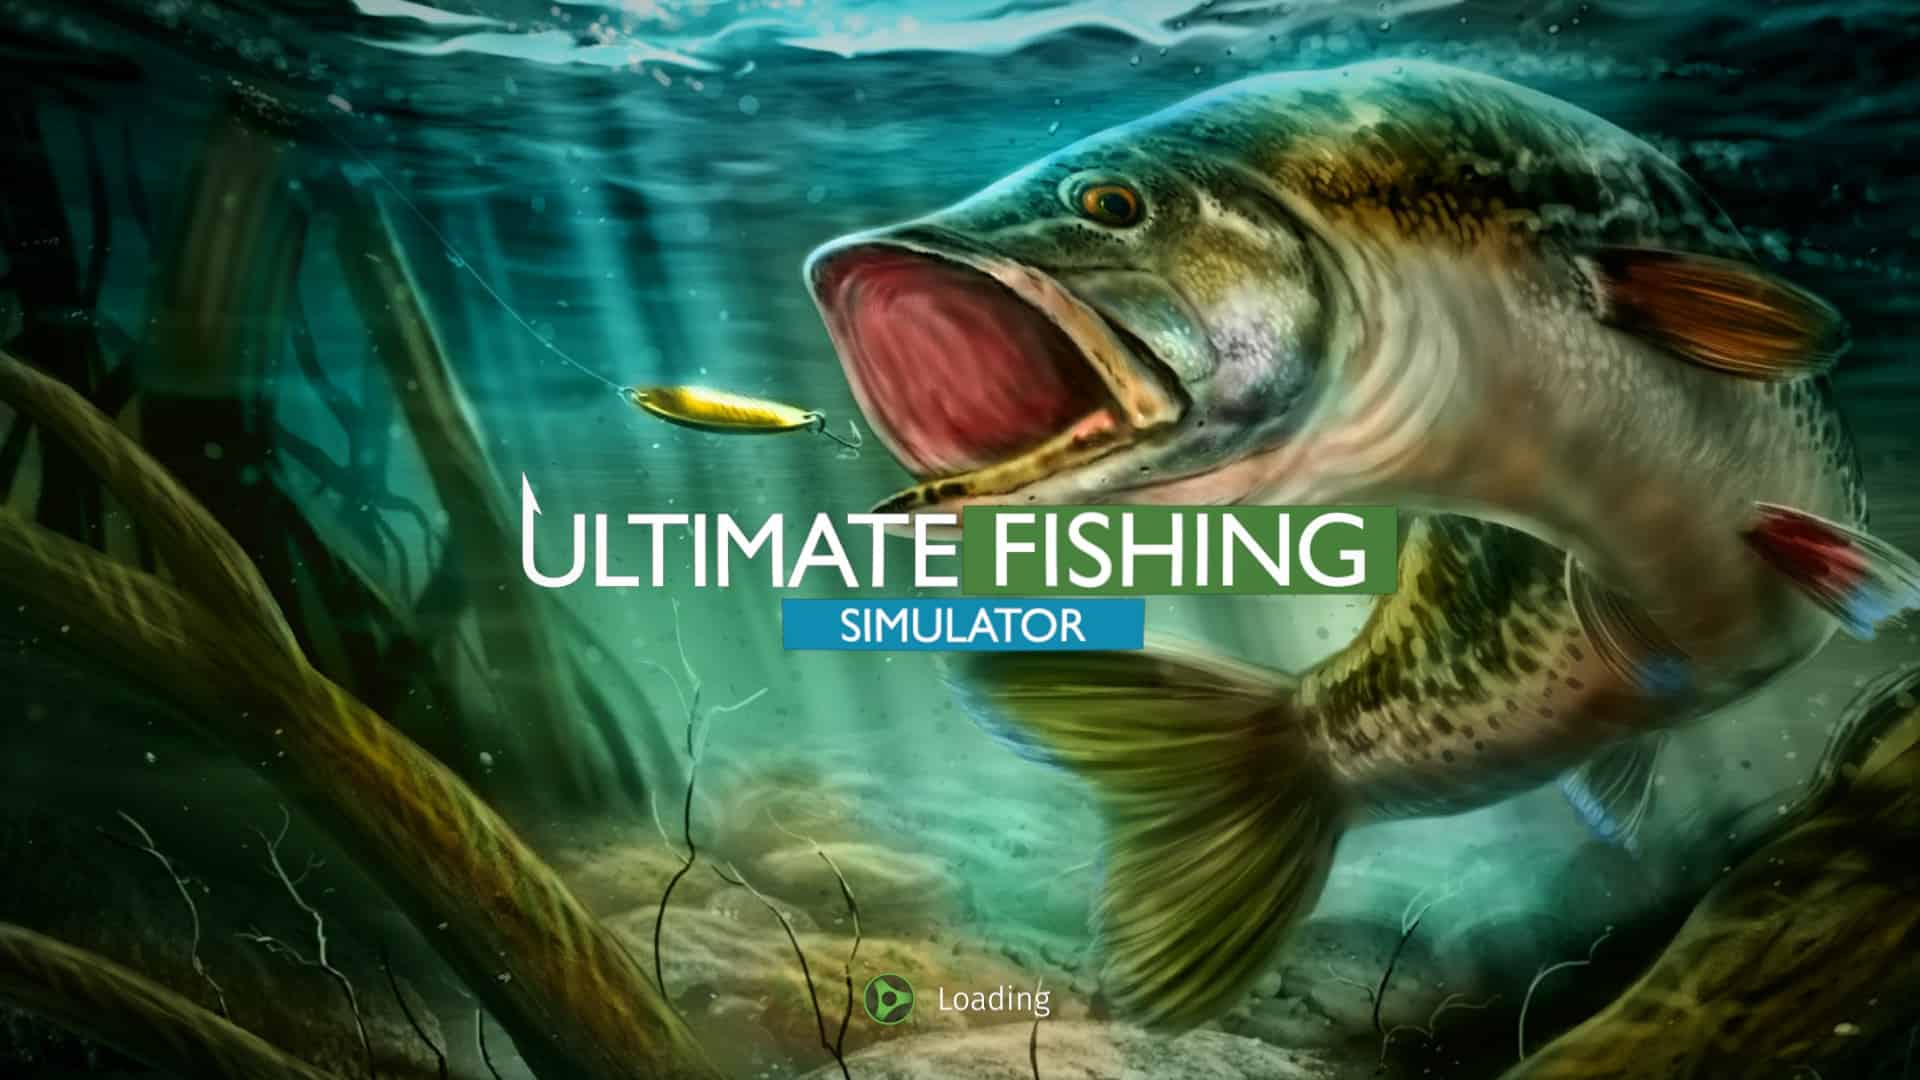 Ultimate Fishing Simulator Preview (Early Access) – Fishing with Your Dad Simulator 2018